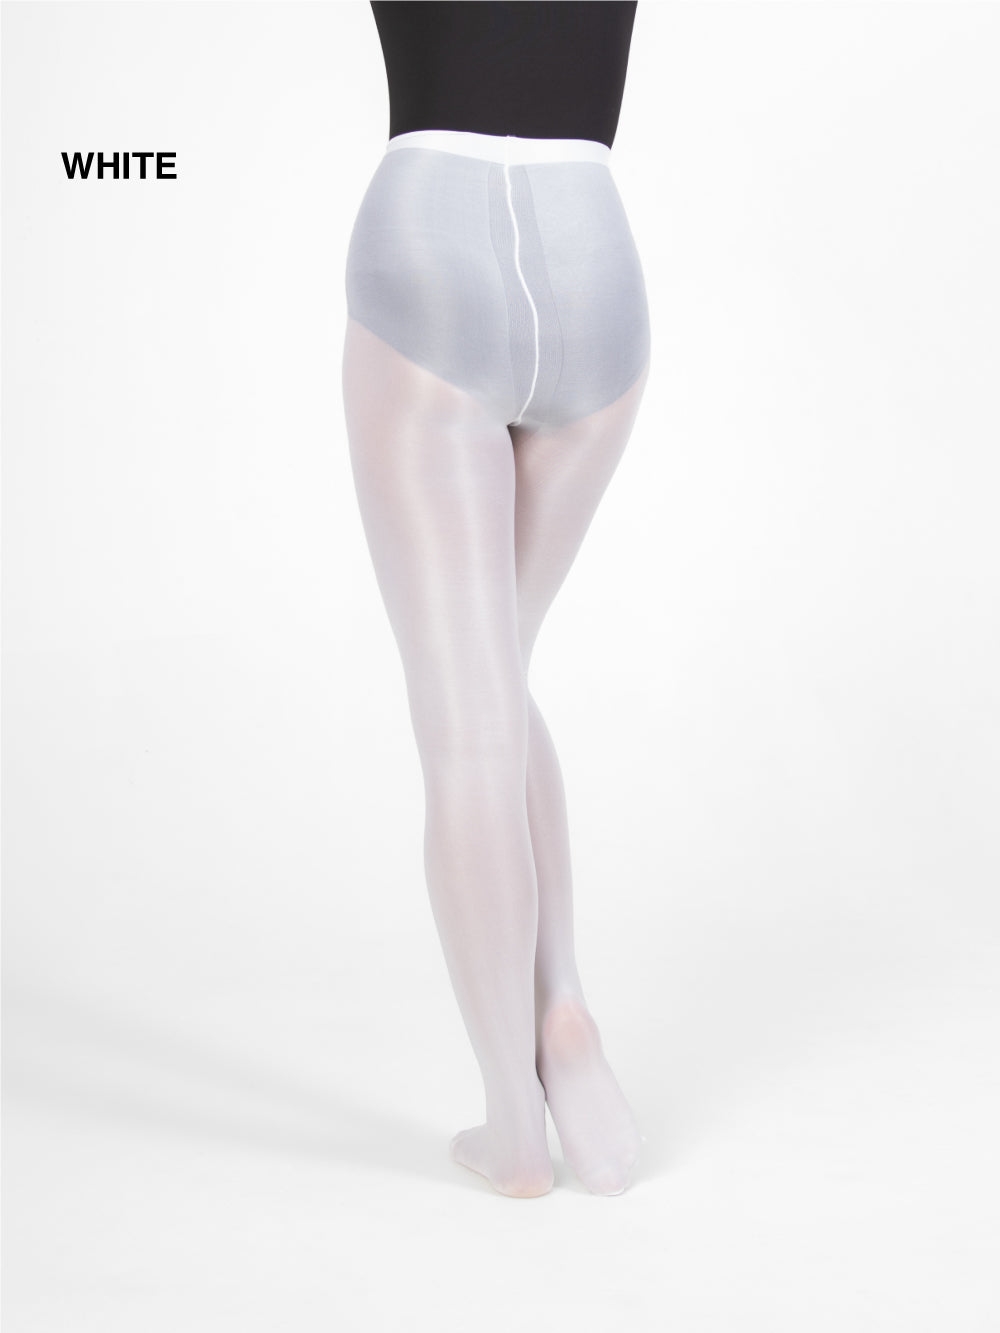 Plus Size Ultra-Shimmery Footed Tight by Body Wrappers : A55X, On Stage  Dancewear, Capezio Authorized Dealer.